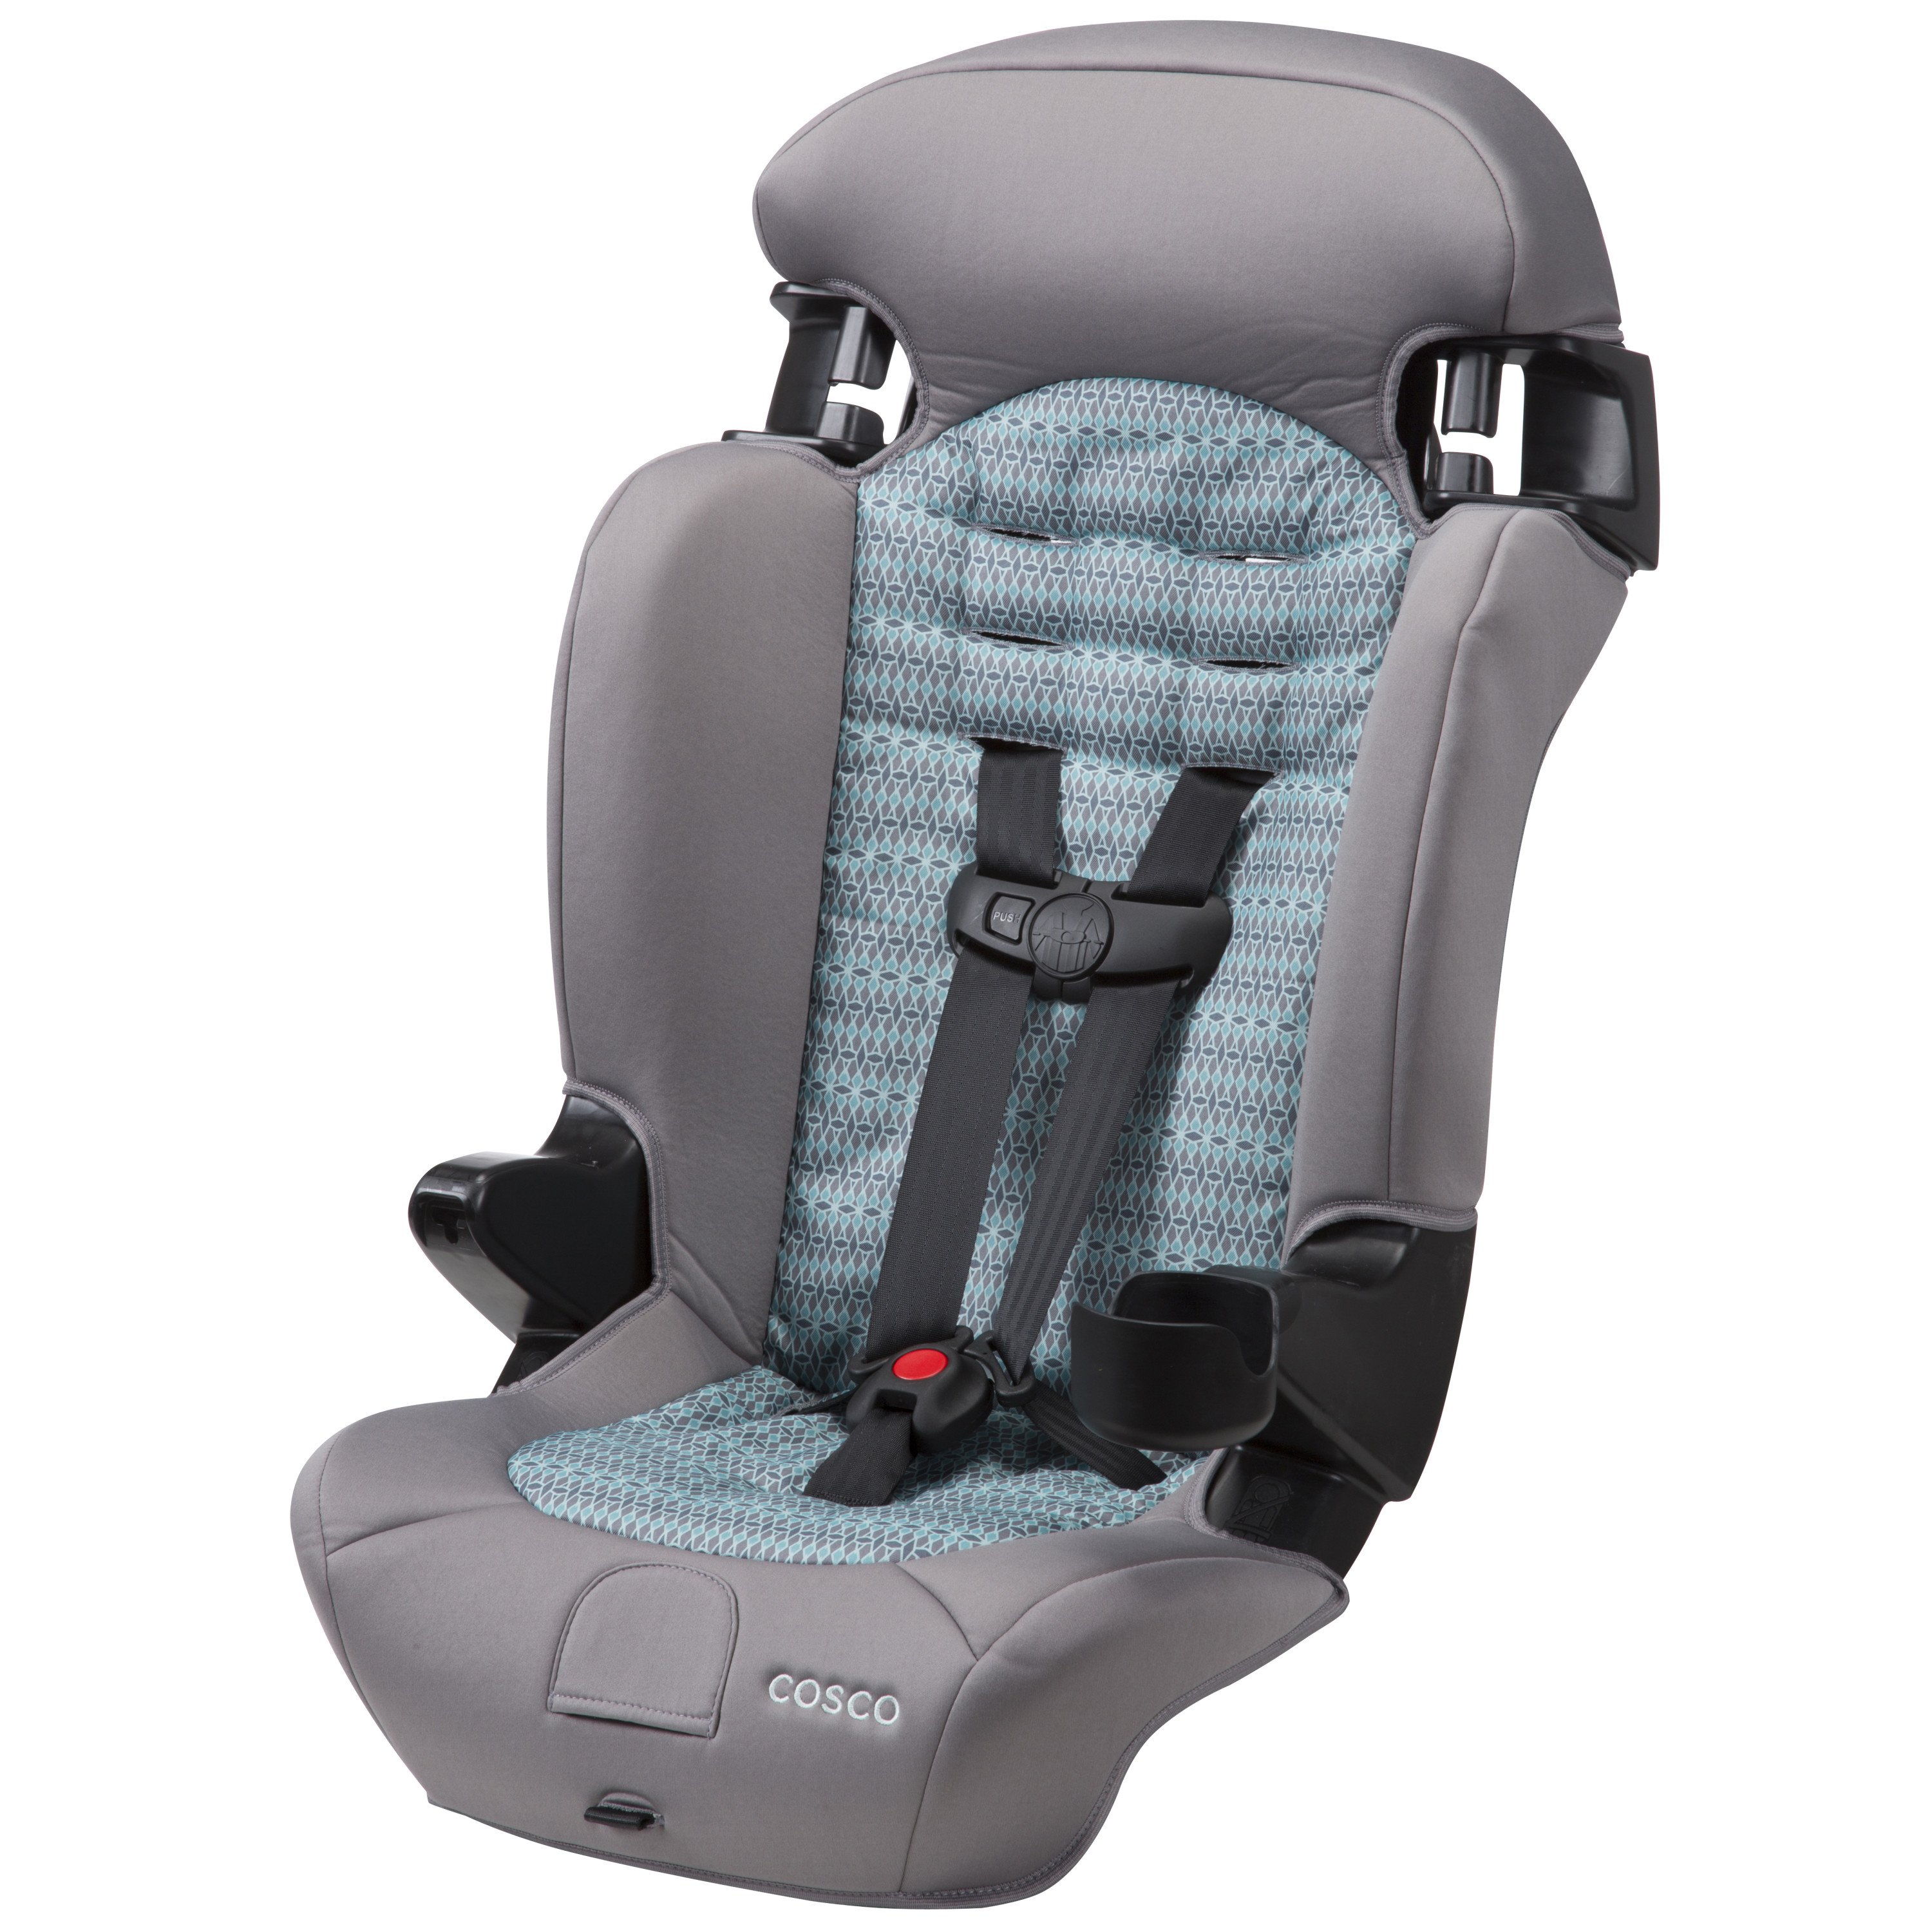 Cosco Finale Booster Car Seat, Abstract Gray - image 1 of 26